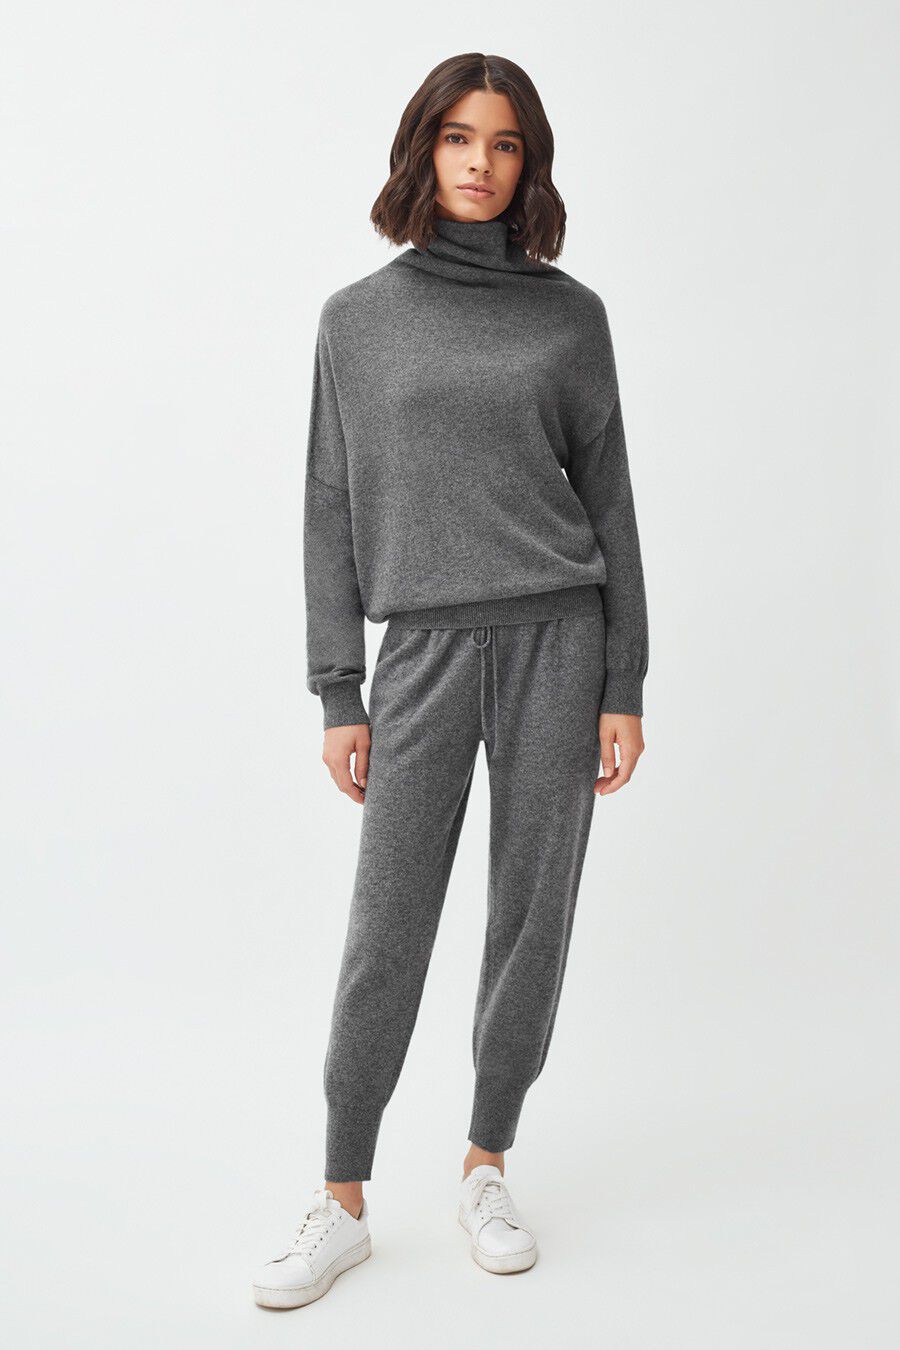 Woman standing in turtleneck and pants with hands in pockets.